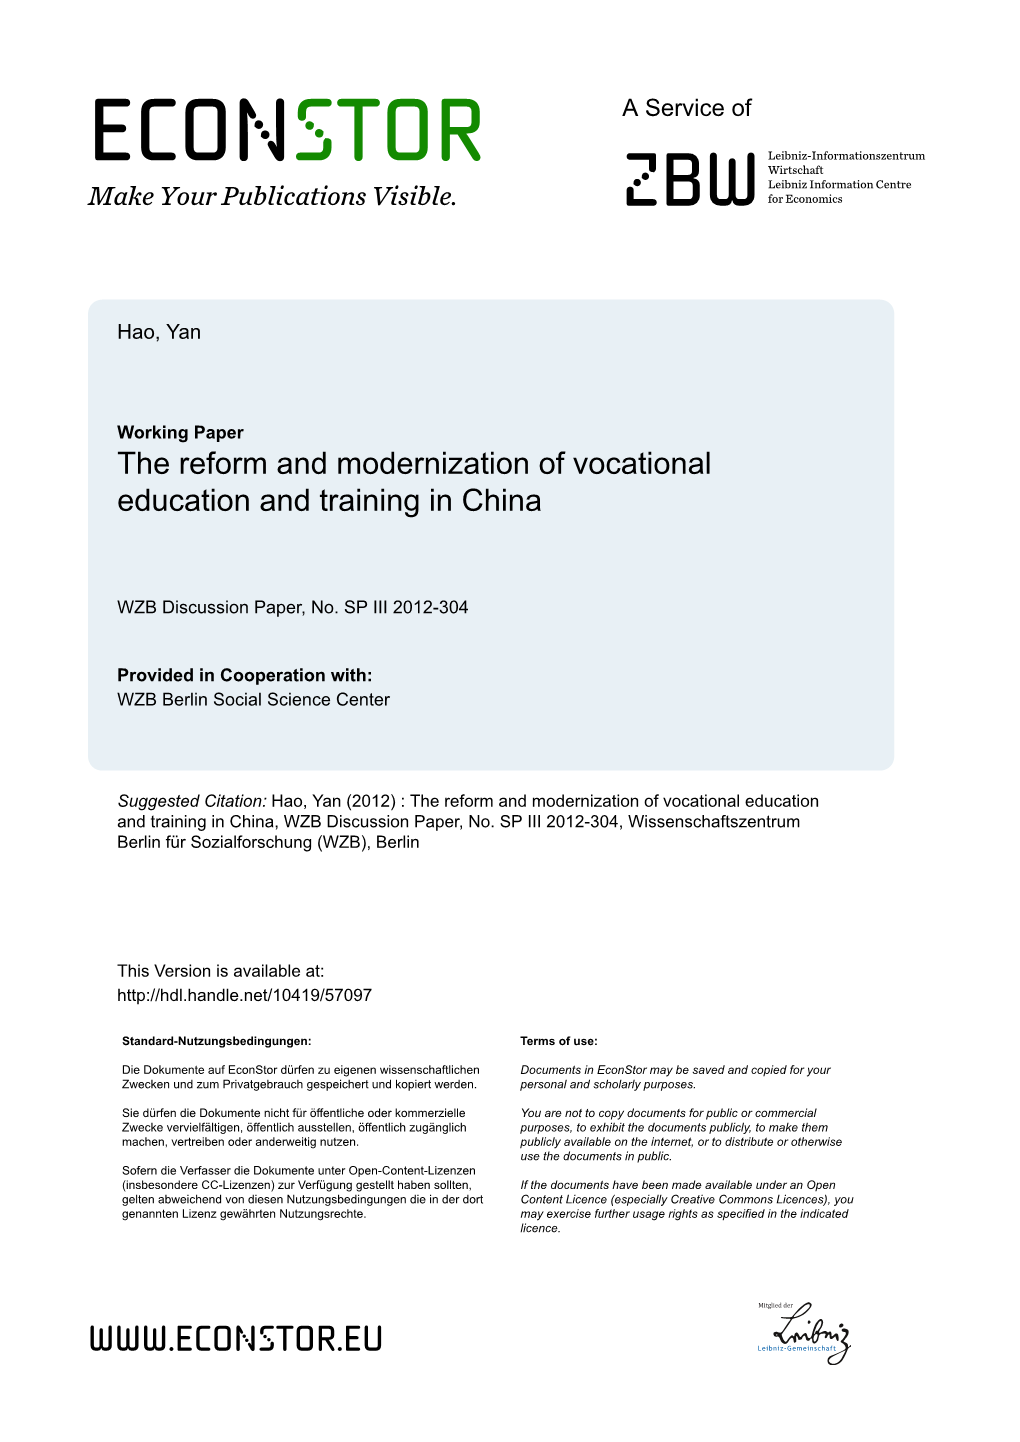 The Reform and Modernization of Vocational Education and Training in China